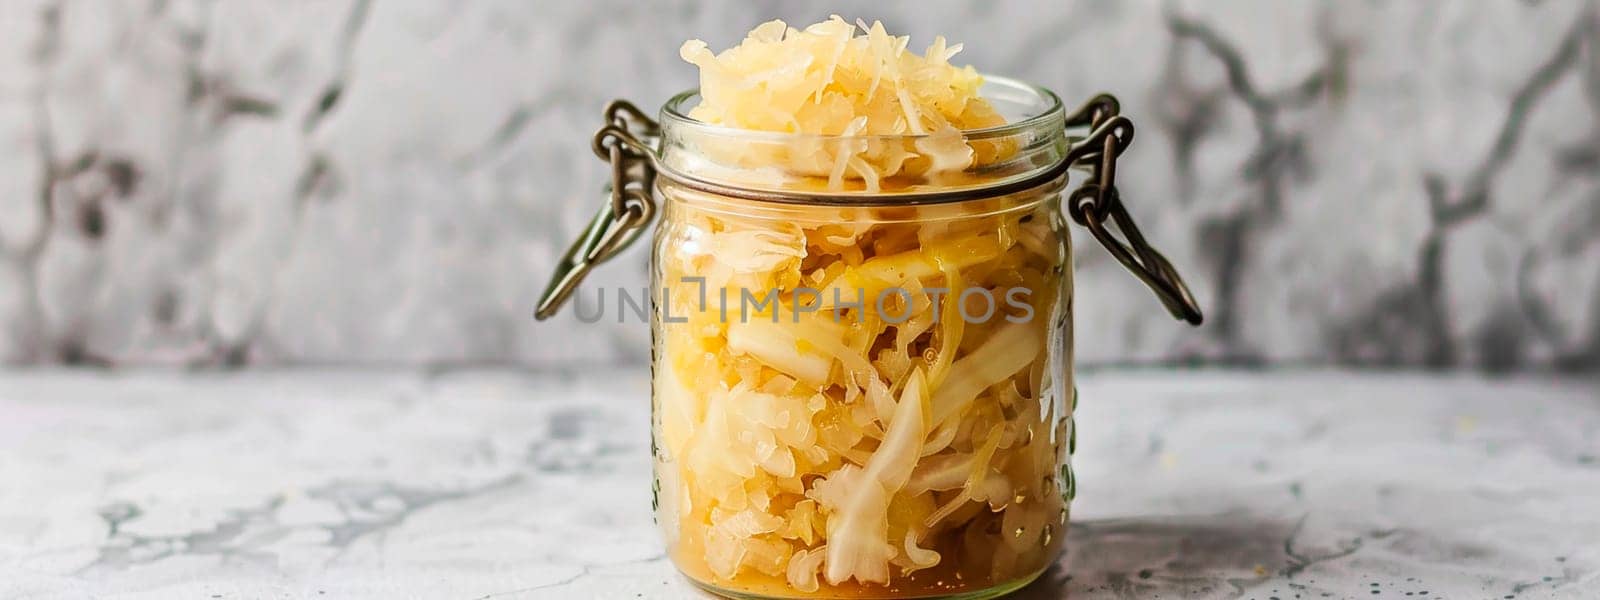 sauerkraut in a jar and spices. selective focus. food.